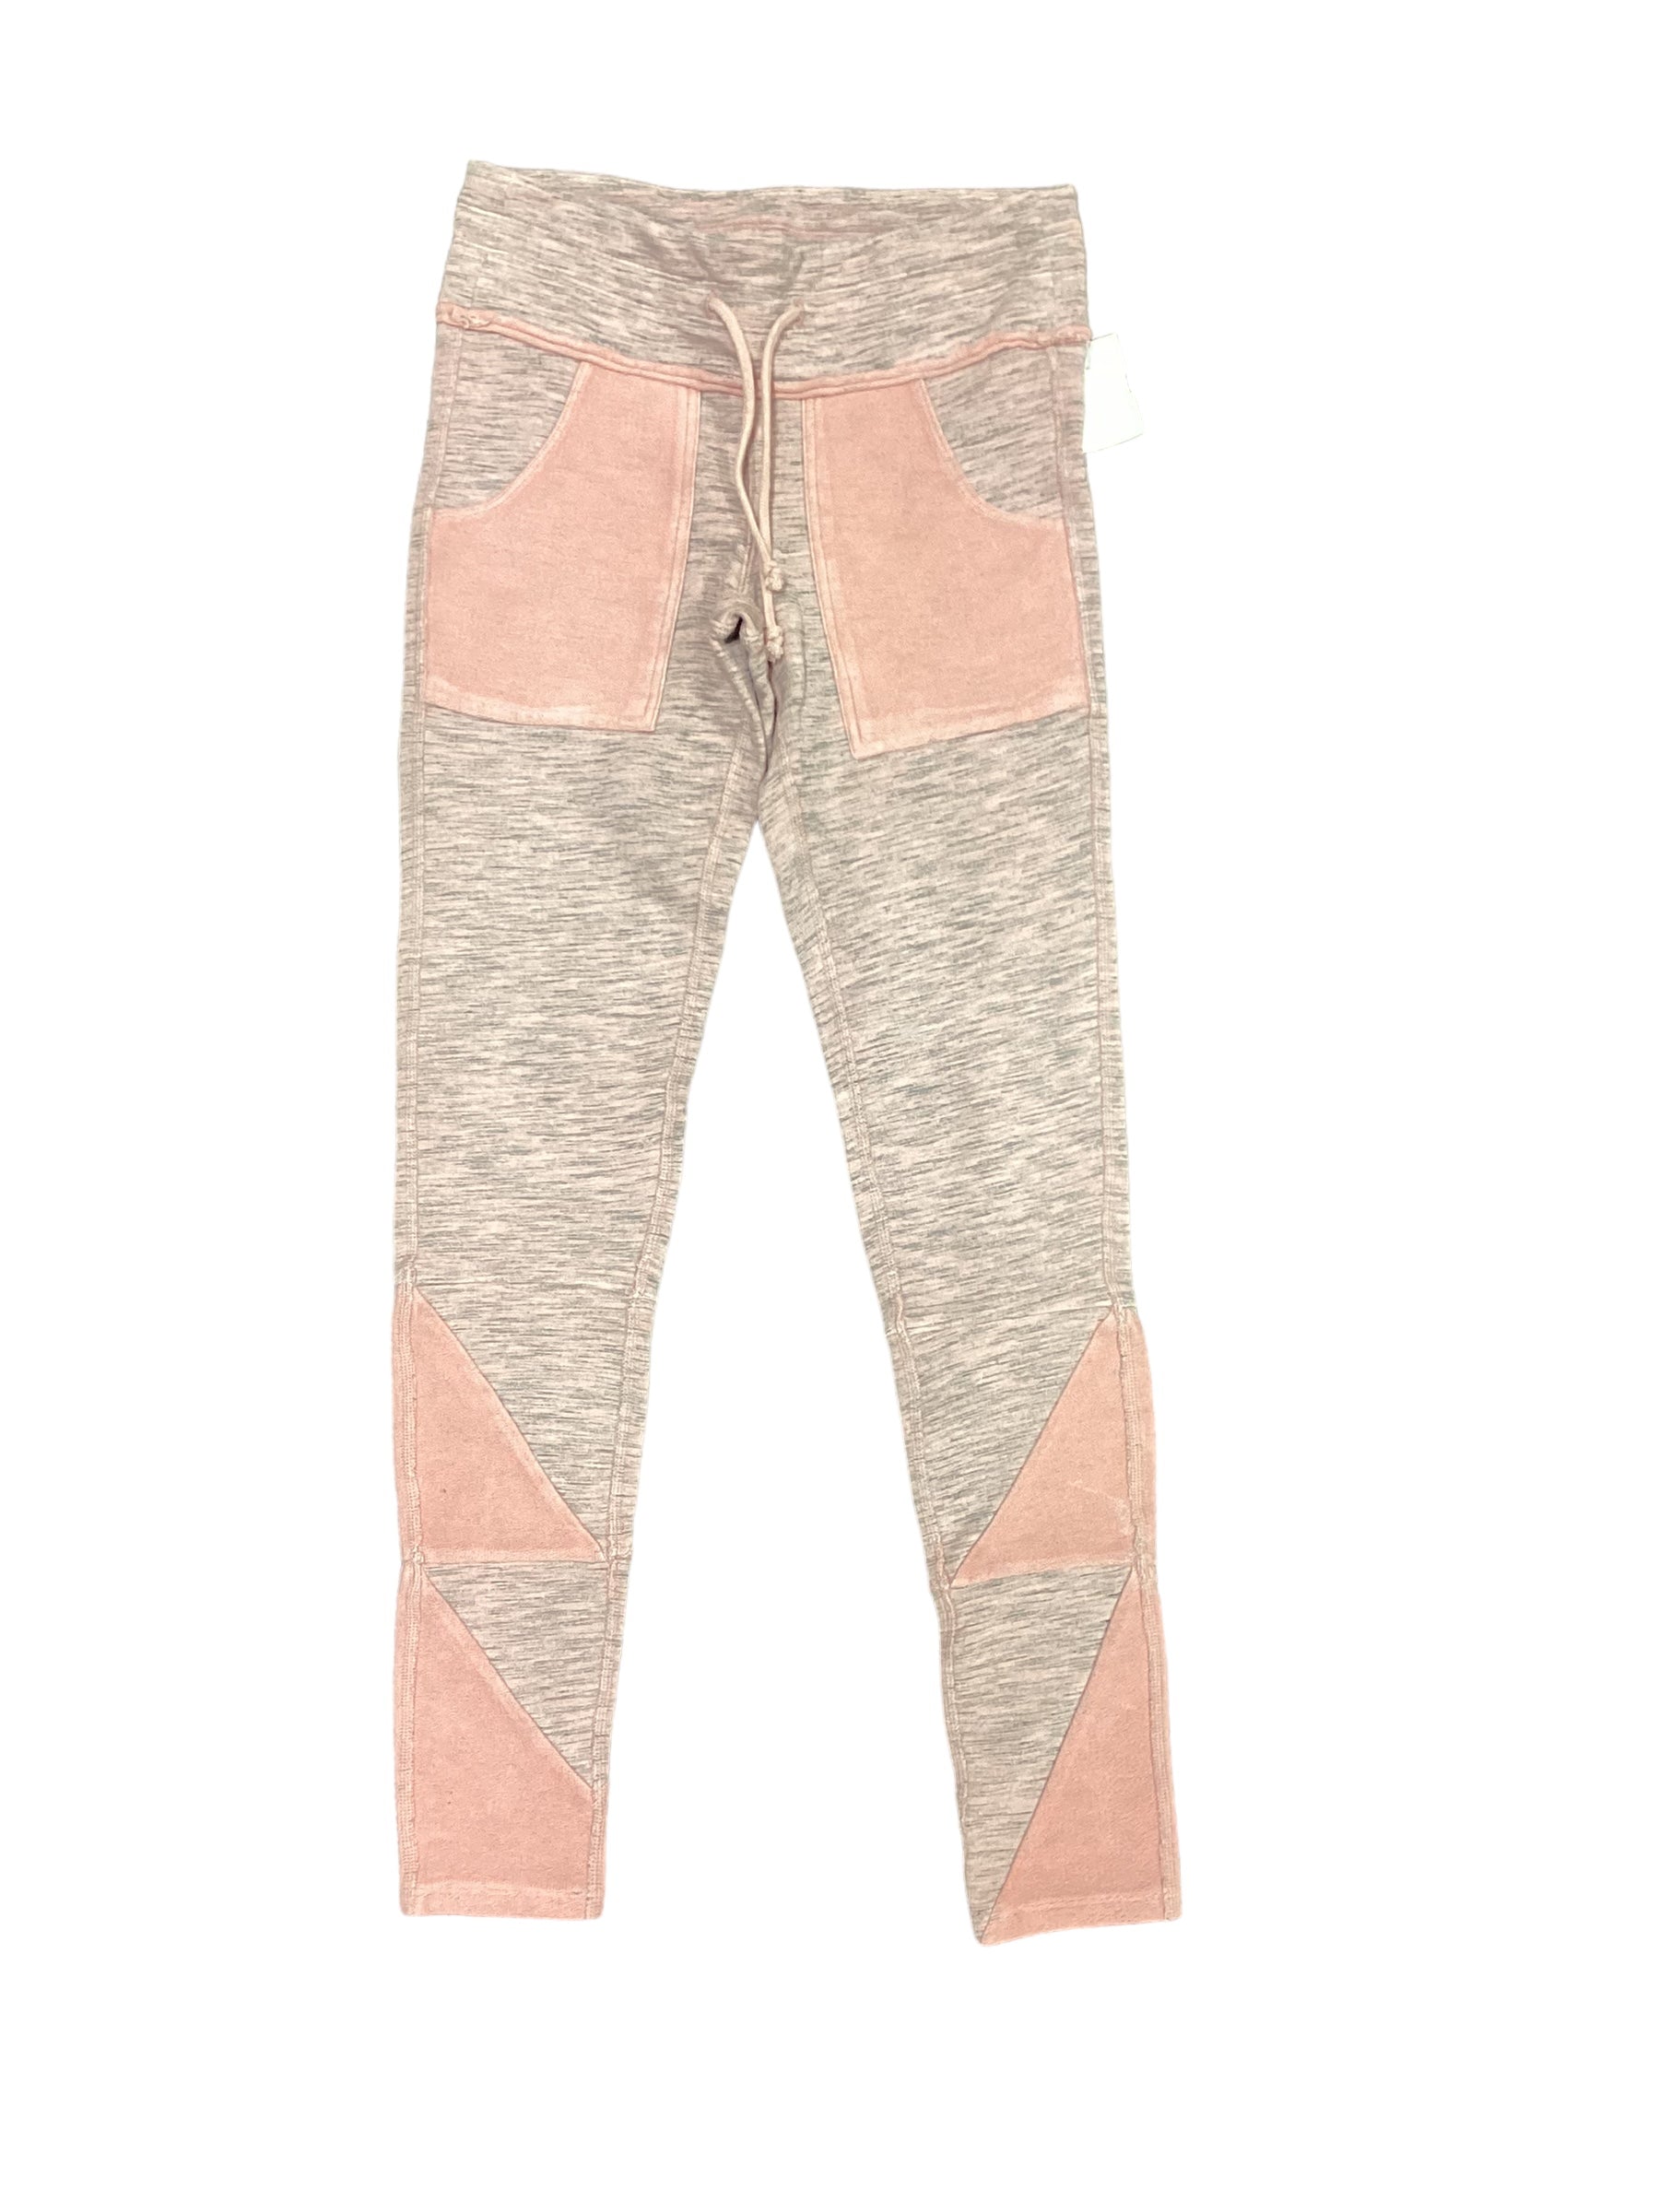 Pants Joggers By Free People Size: Xs